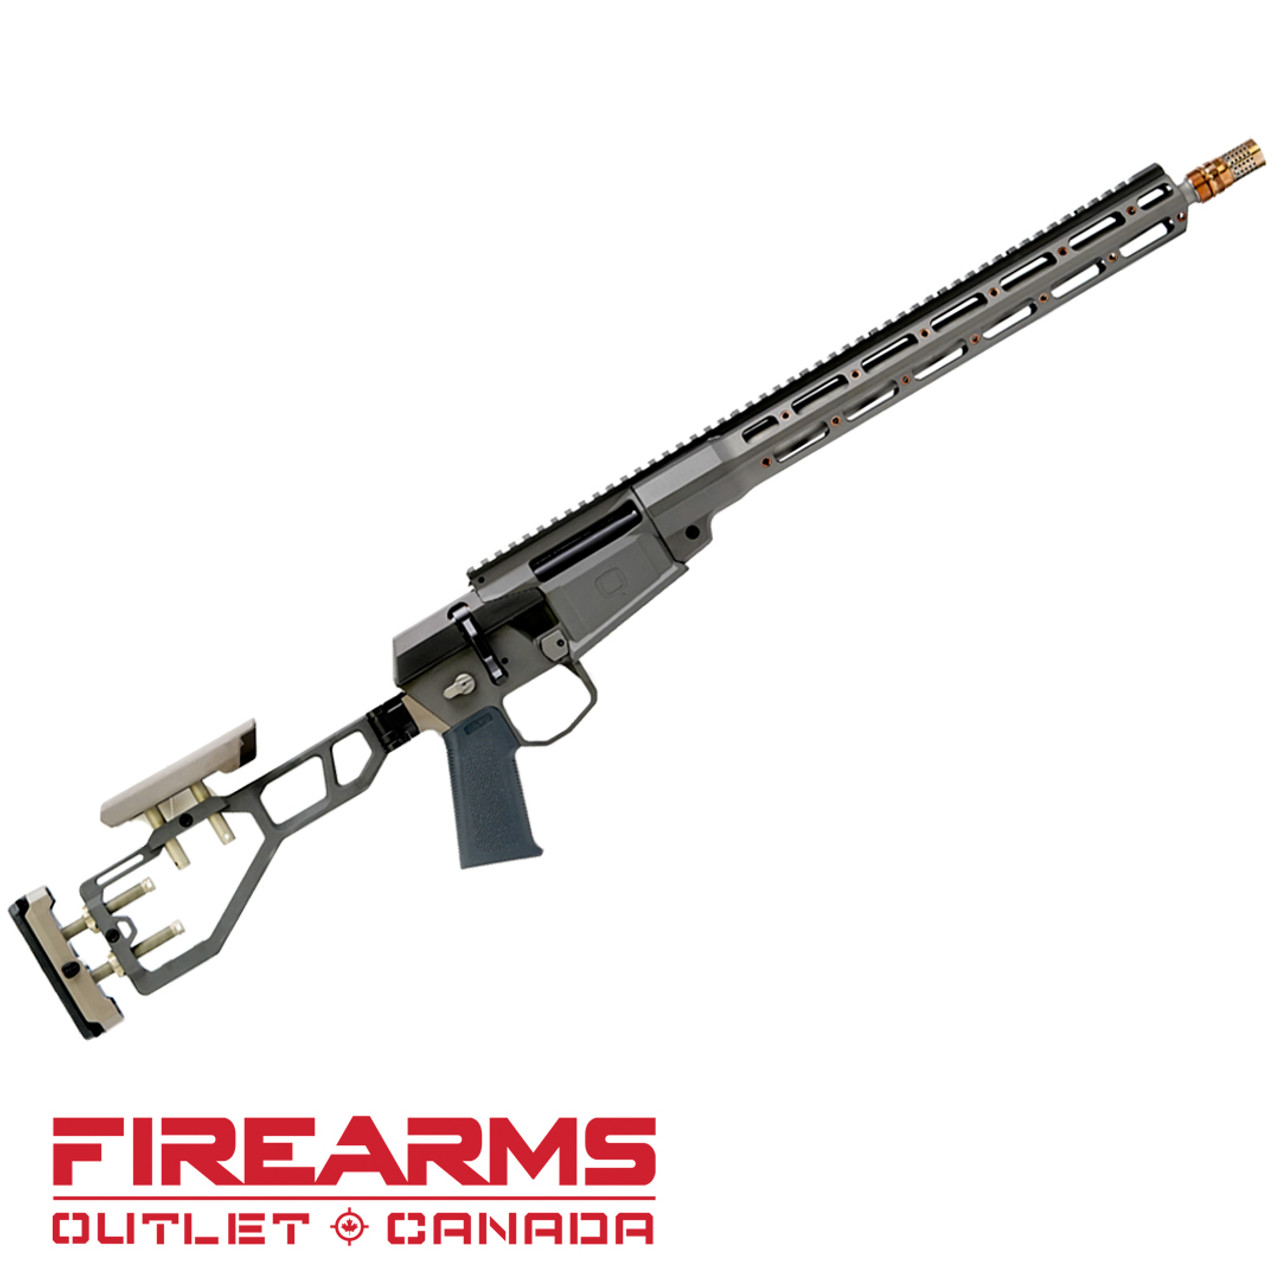 The Fix by Q - 6.5 Creedmoor, 16" [FIX-6.5-16IN-GRY]